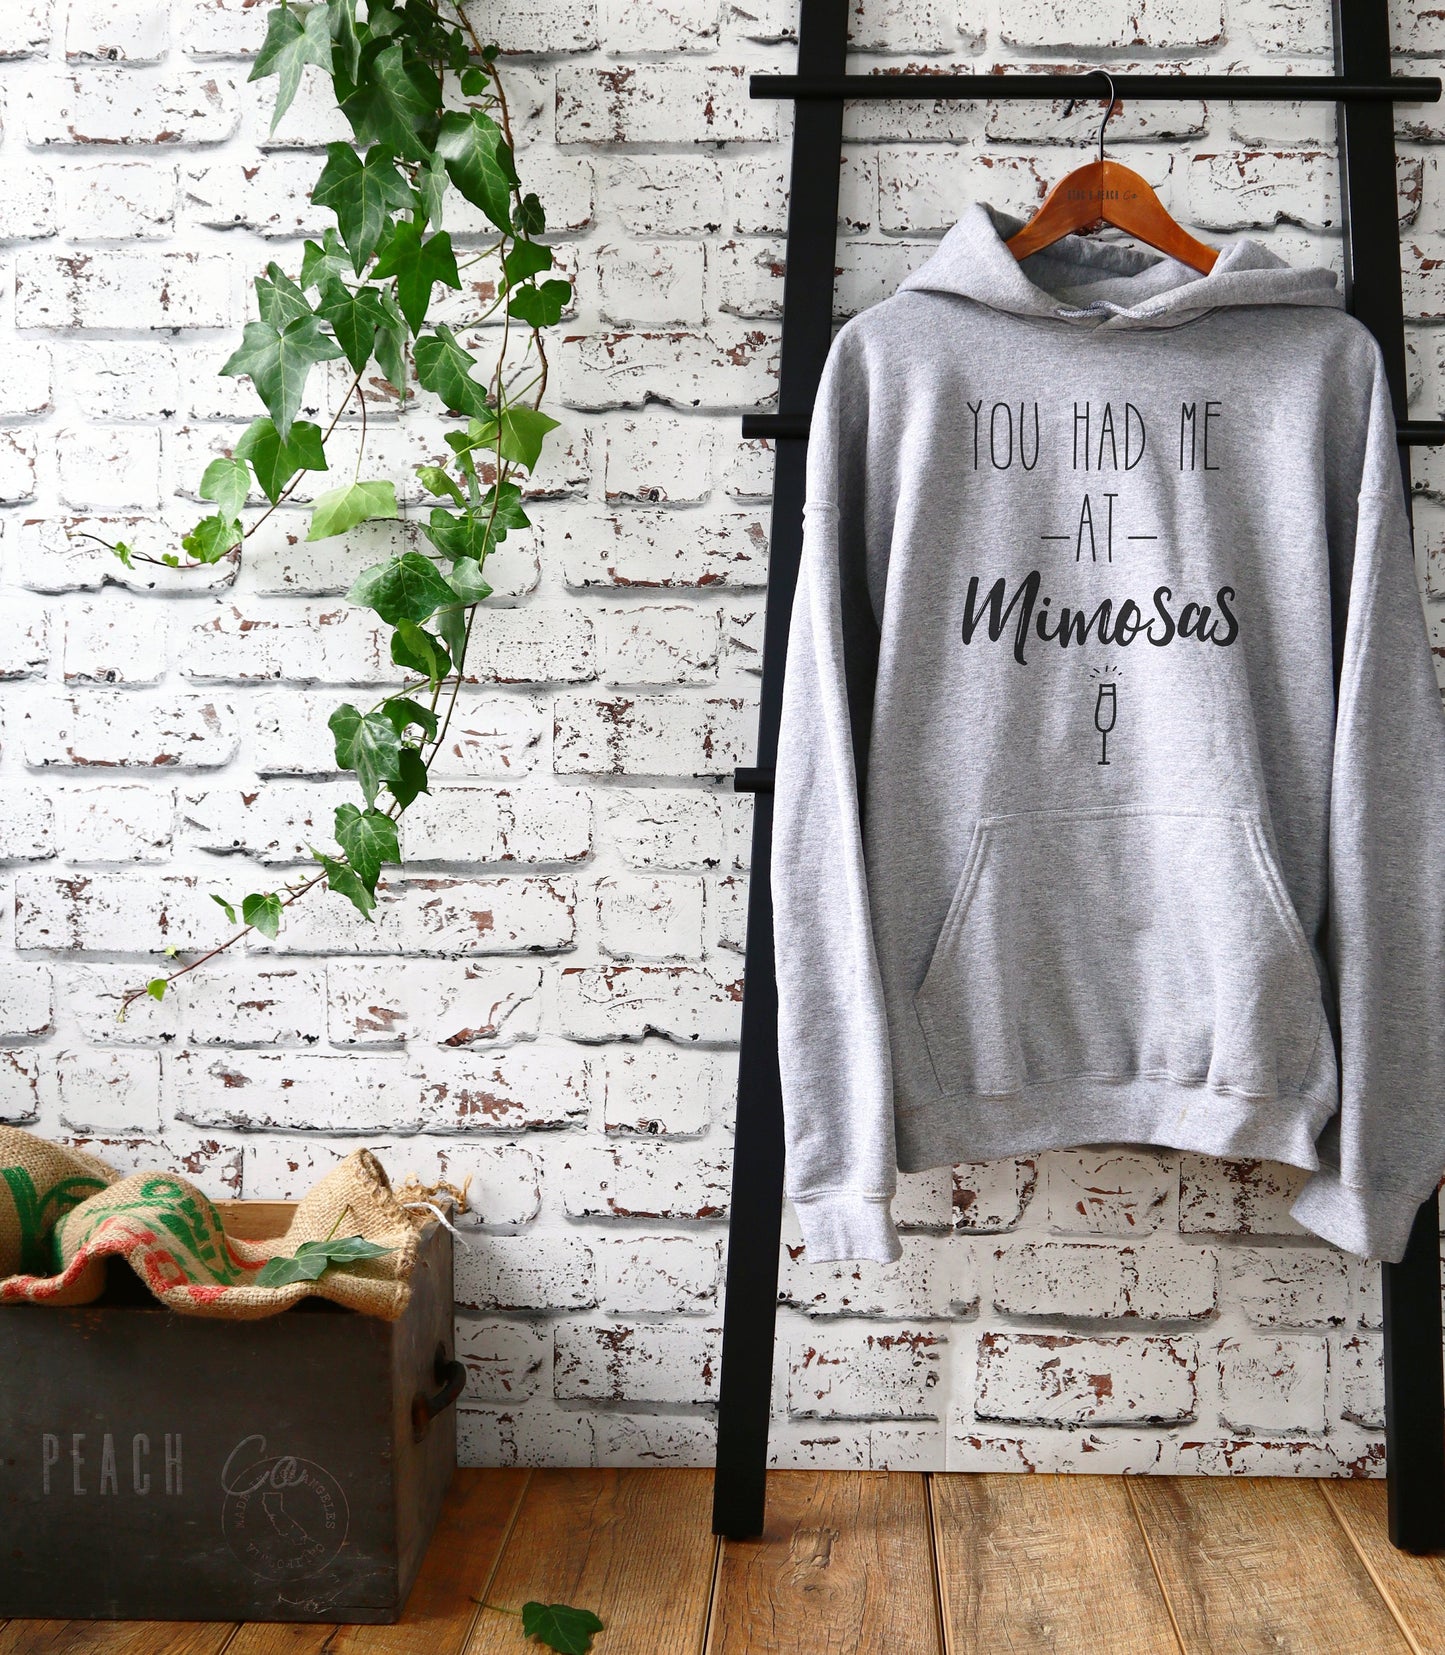 You Had Me At Mimosas Hoodie - Mimosa Shirt, Mimosa Shirts, Brunch shirt, Sunday Brunch Shirt, Brunch and Bubbly, Cocktail Shirt, Weekend